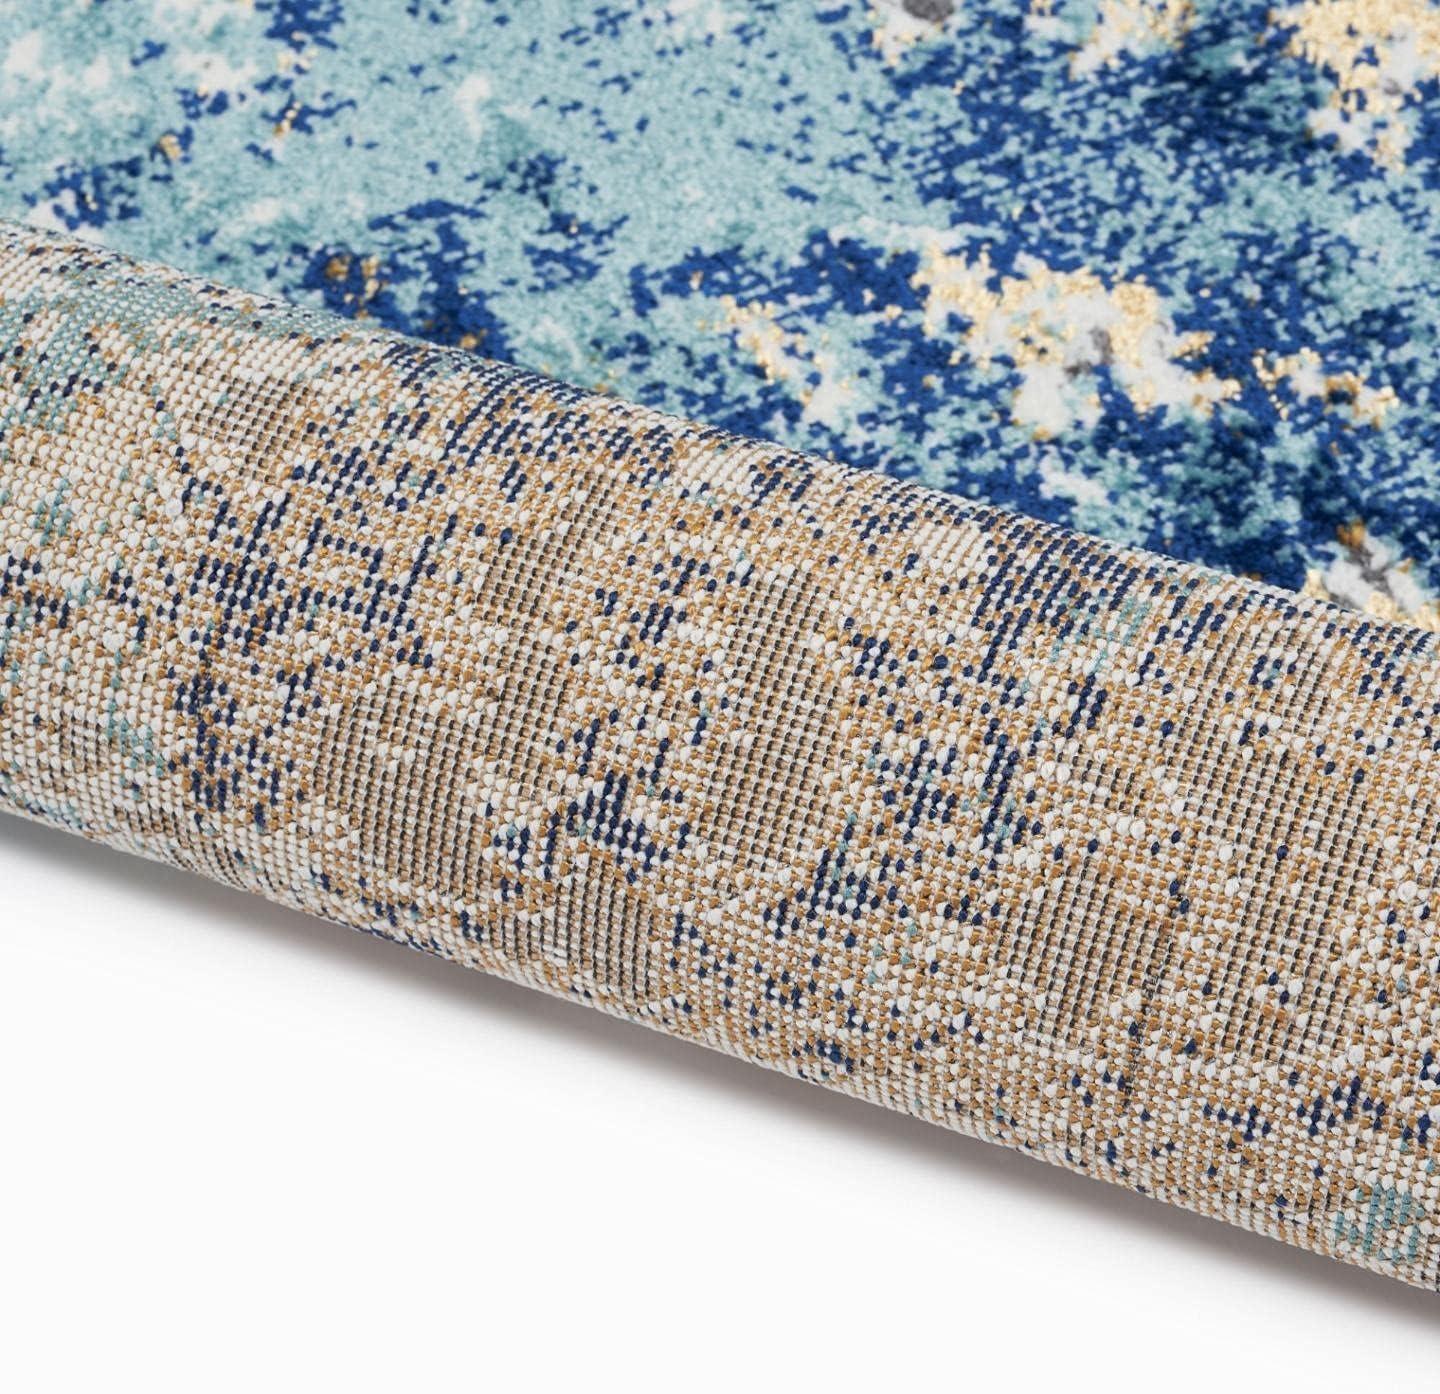 Abstract Splatter Blue and Gold 8' x 10' Synthetic Area Rug